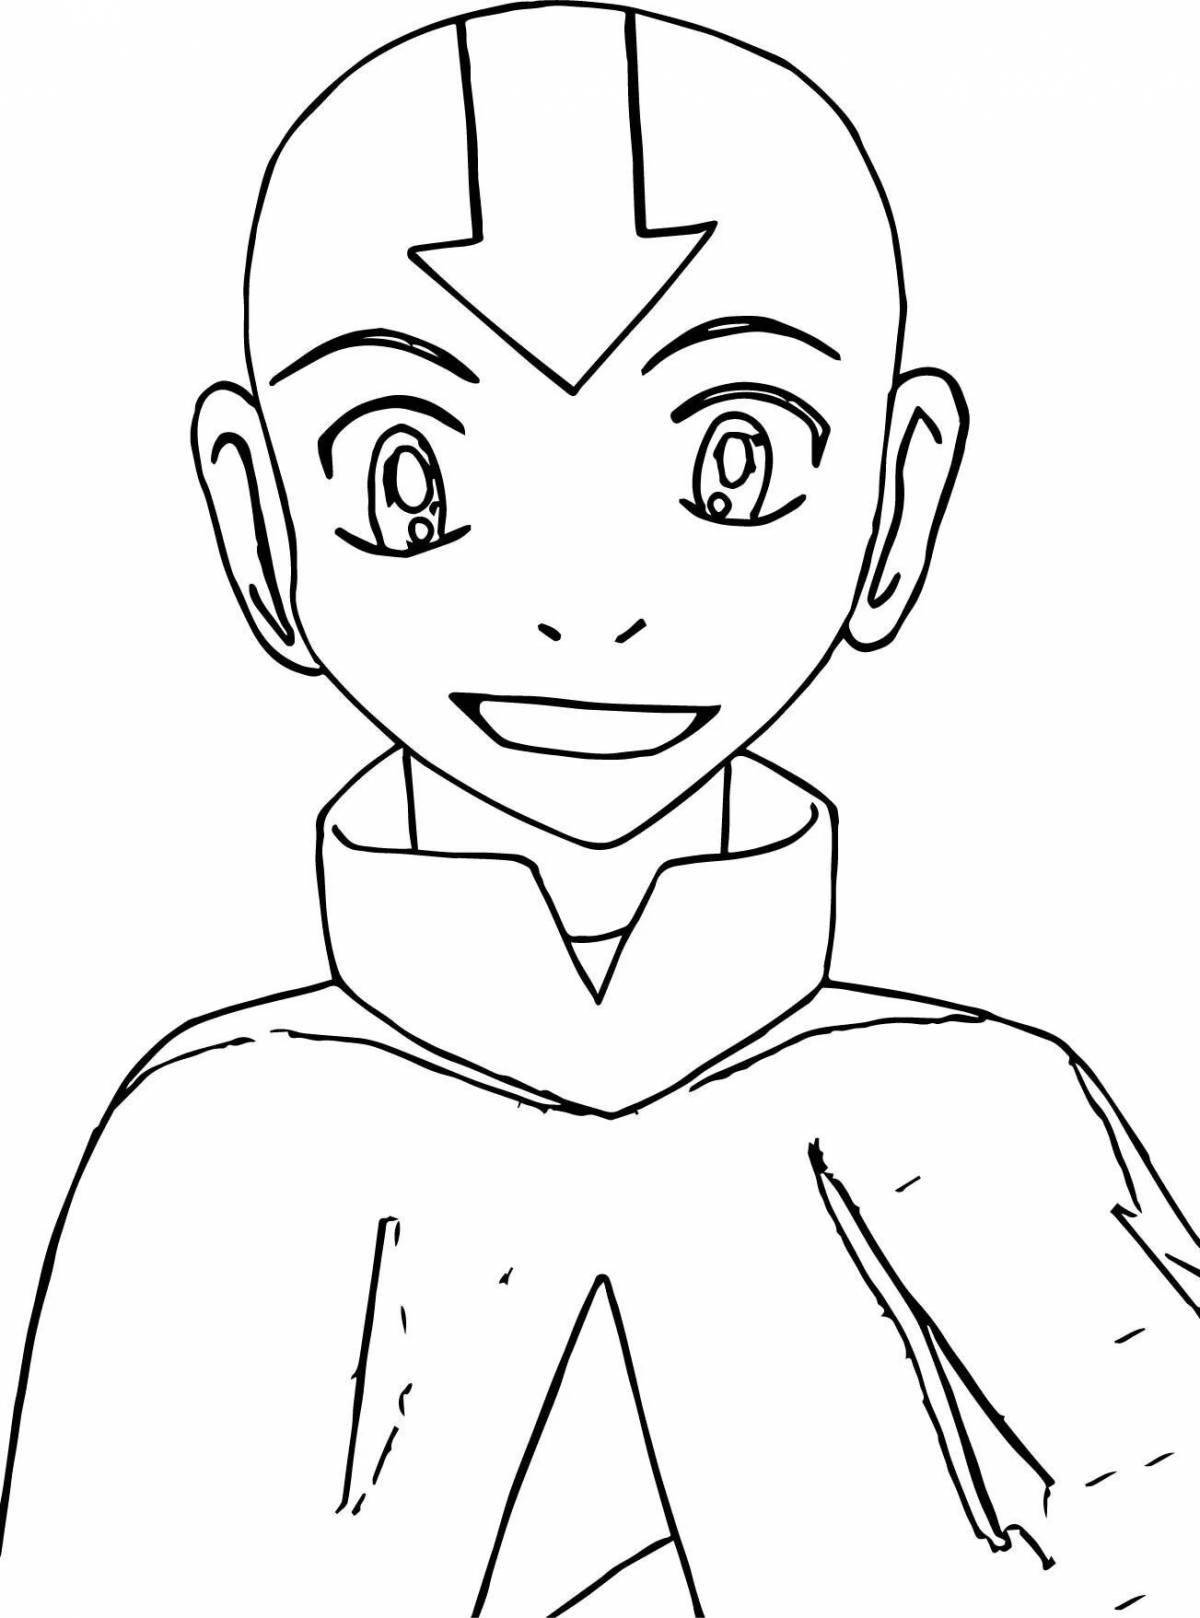 Aang's adorable avatar page